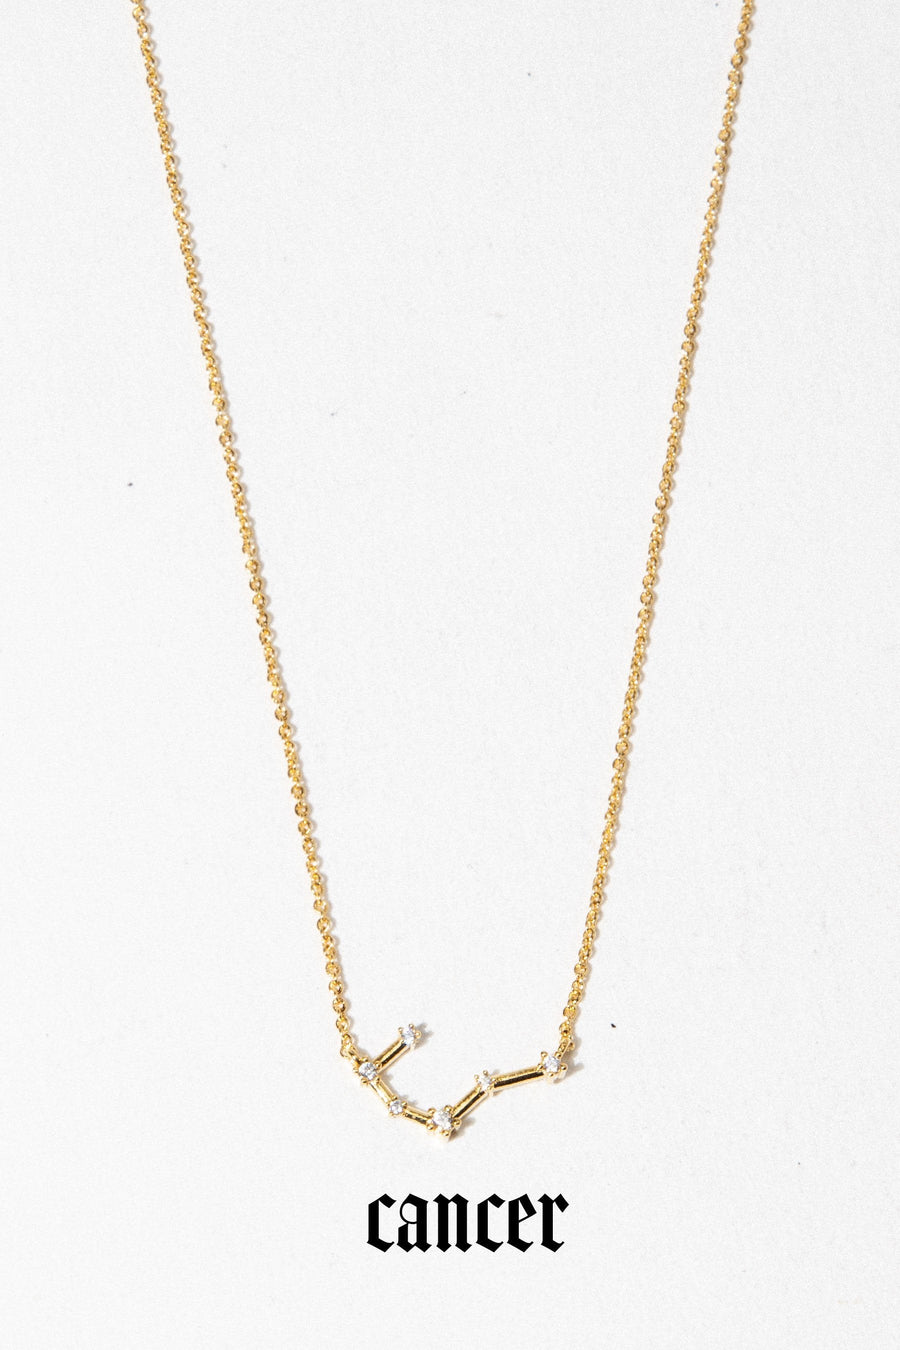 charis Jewelry Cancer / 16 Inches / Gold Constellation Necklace